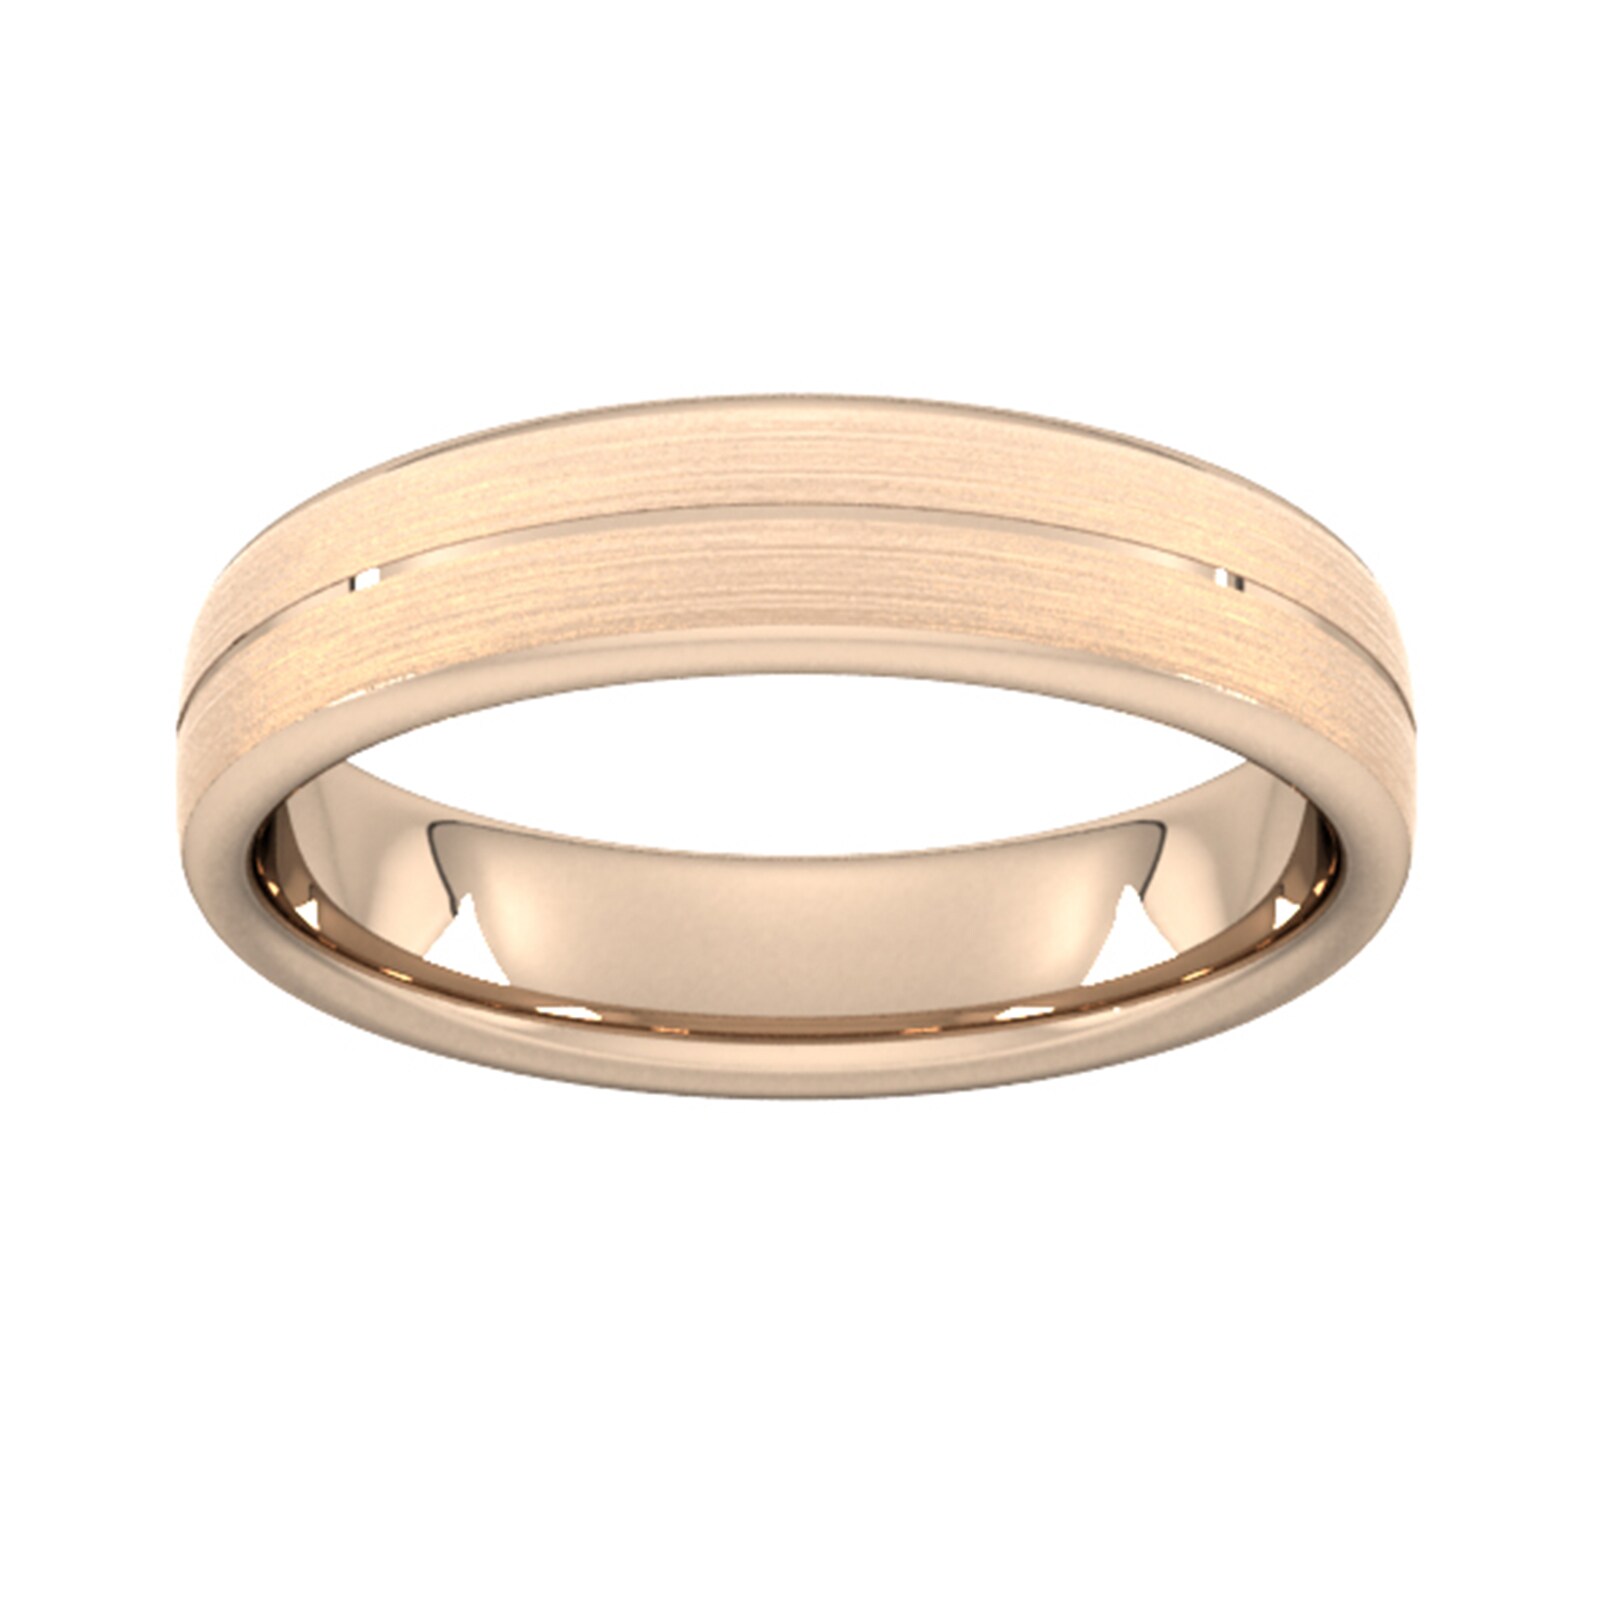 5mm D Shape Standard Centre Groove With Chamfered Edge Wedding Ring In 18 Carat Rose Gold - Ring Size U